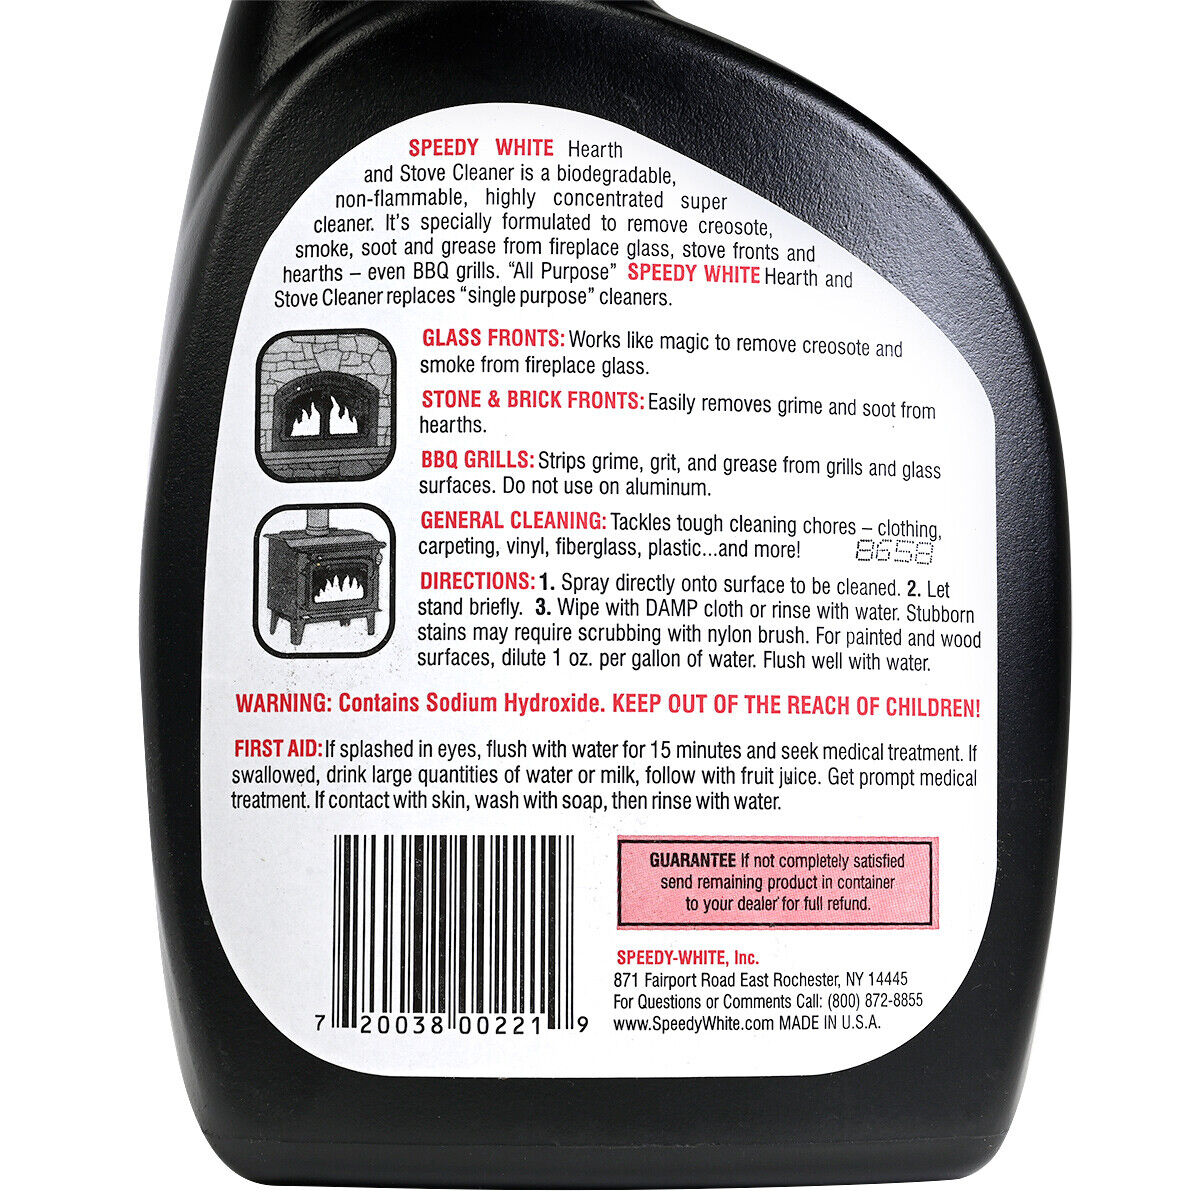 Hearth And Stove Cleaner 22 Fluid Ounce